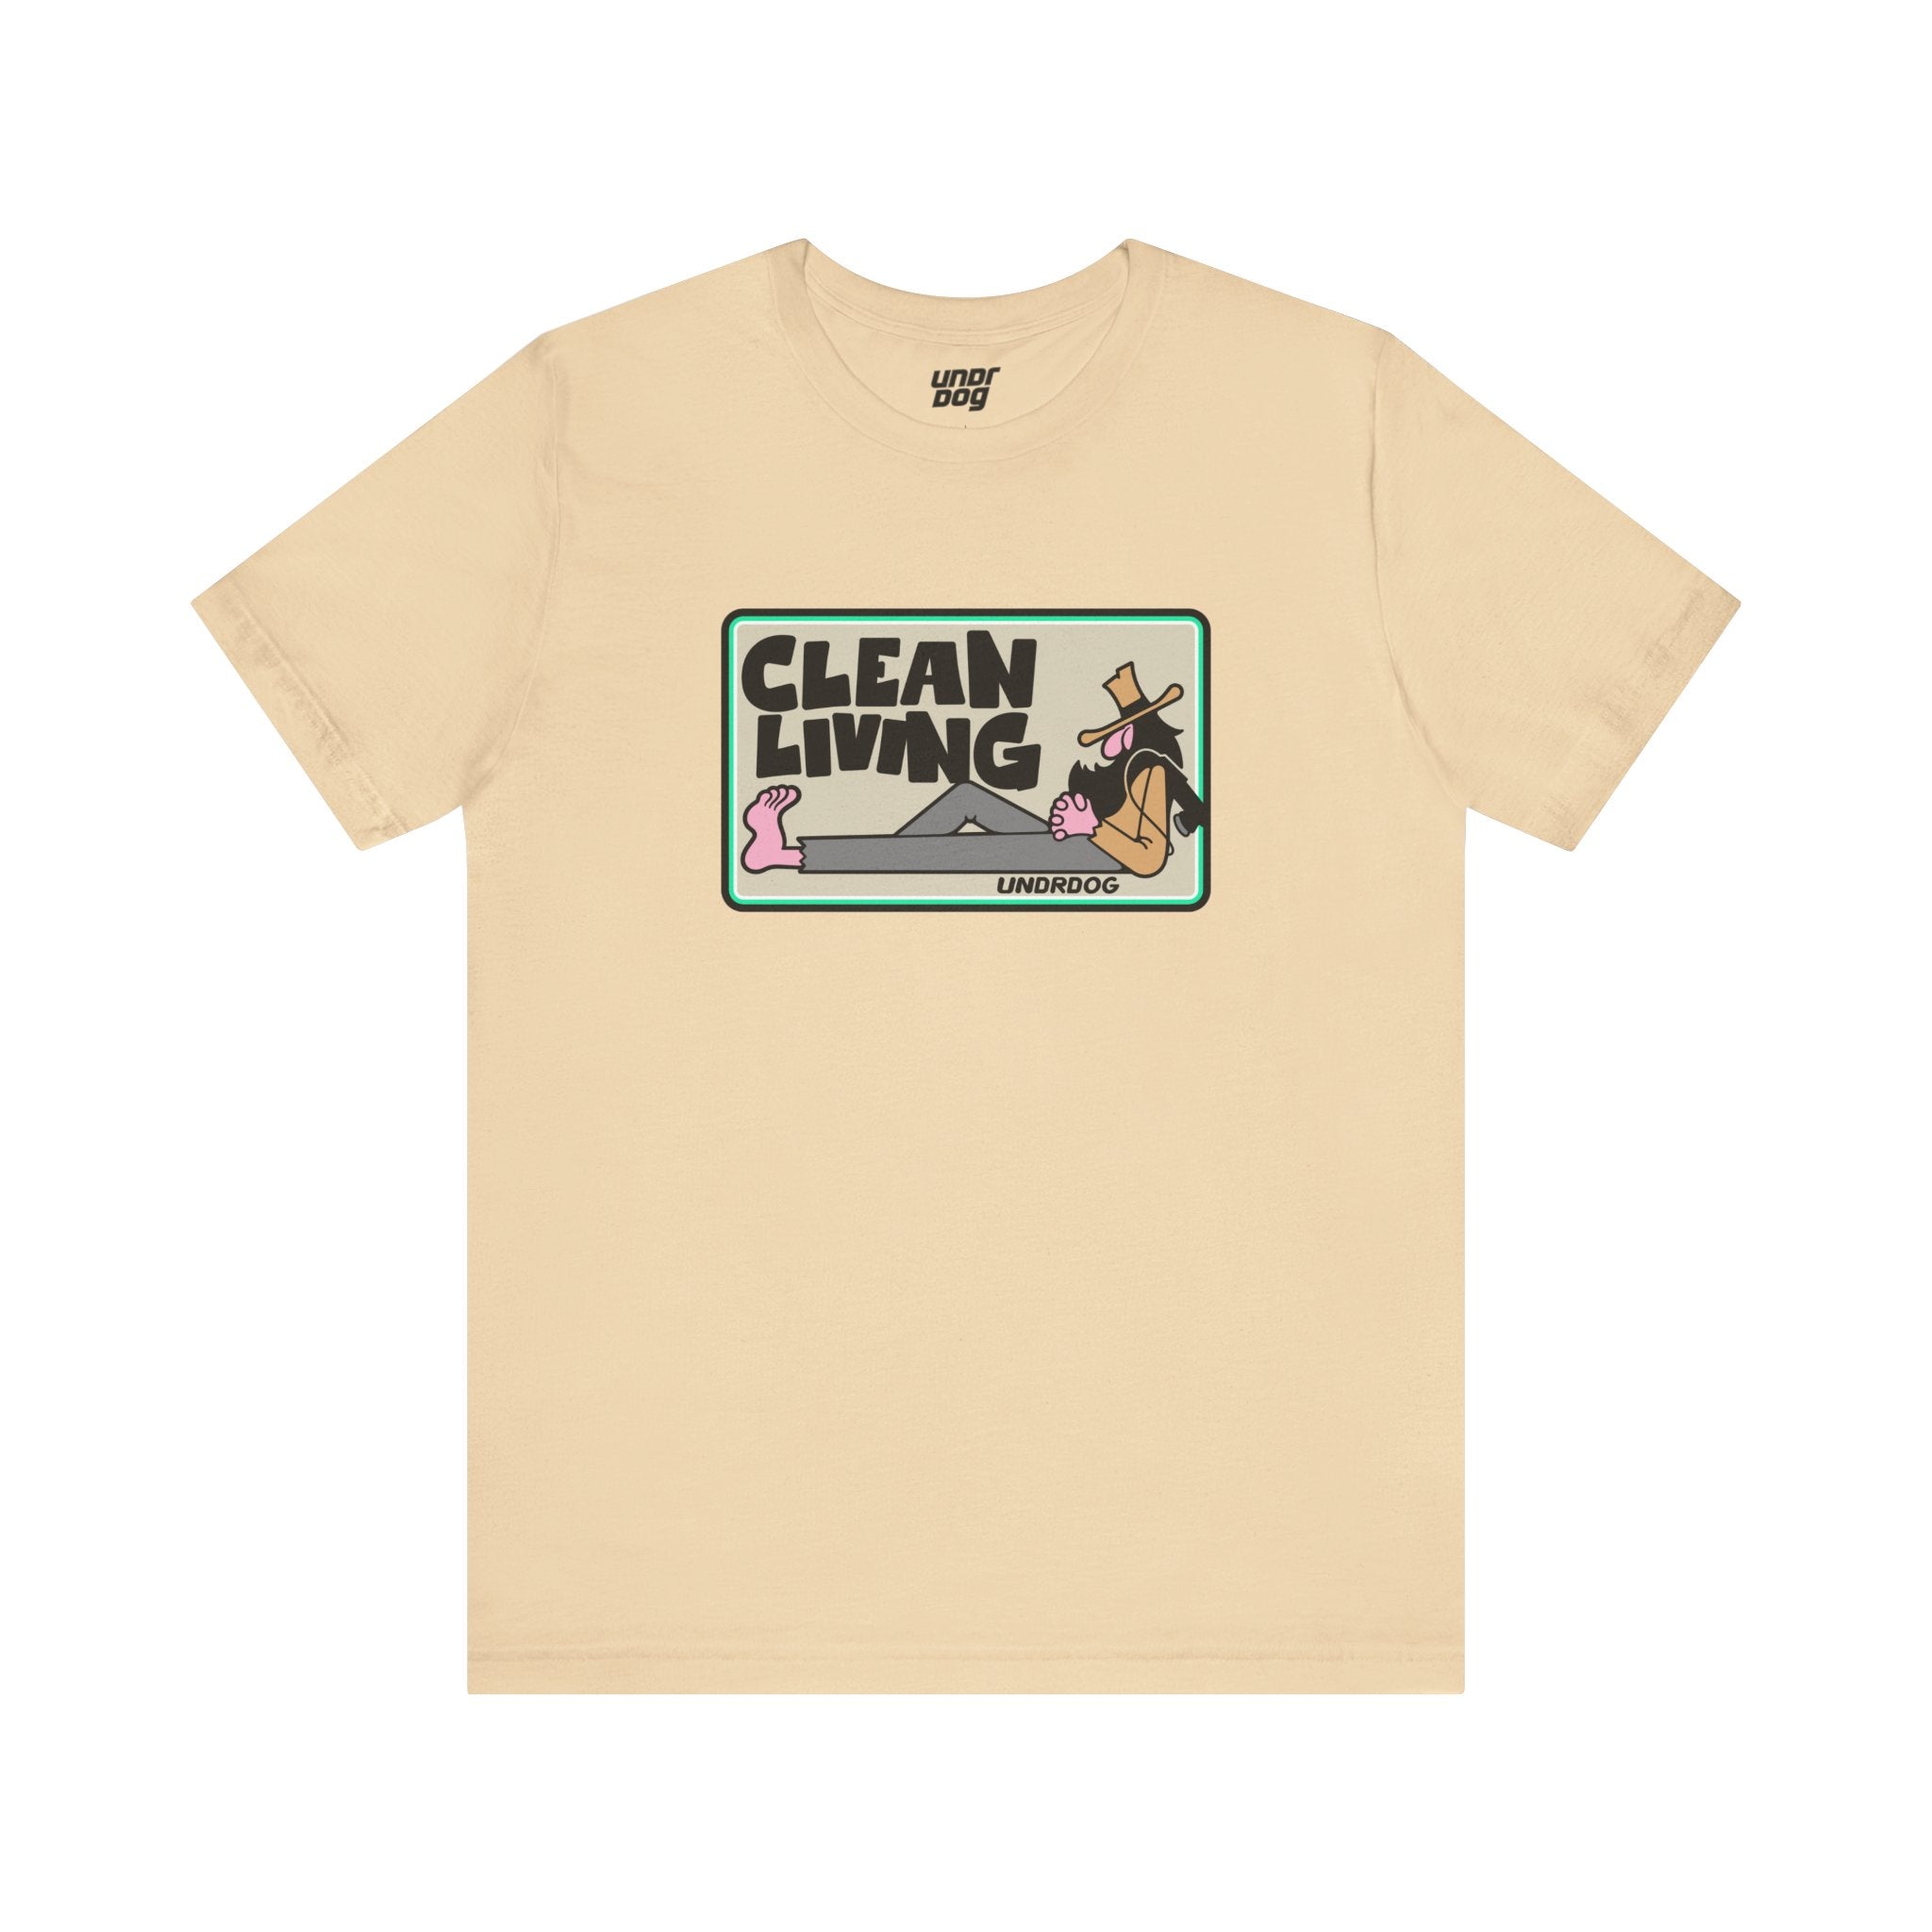 6882983018413678170_2048.jpg - Clean Living v3 by Undrdog Tee - Undrdog Surface Products